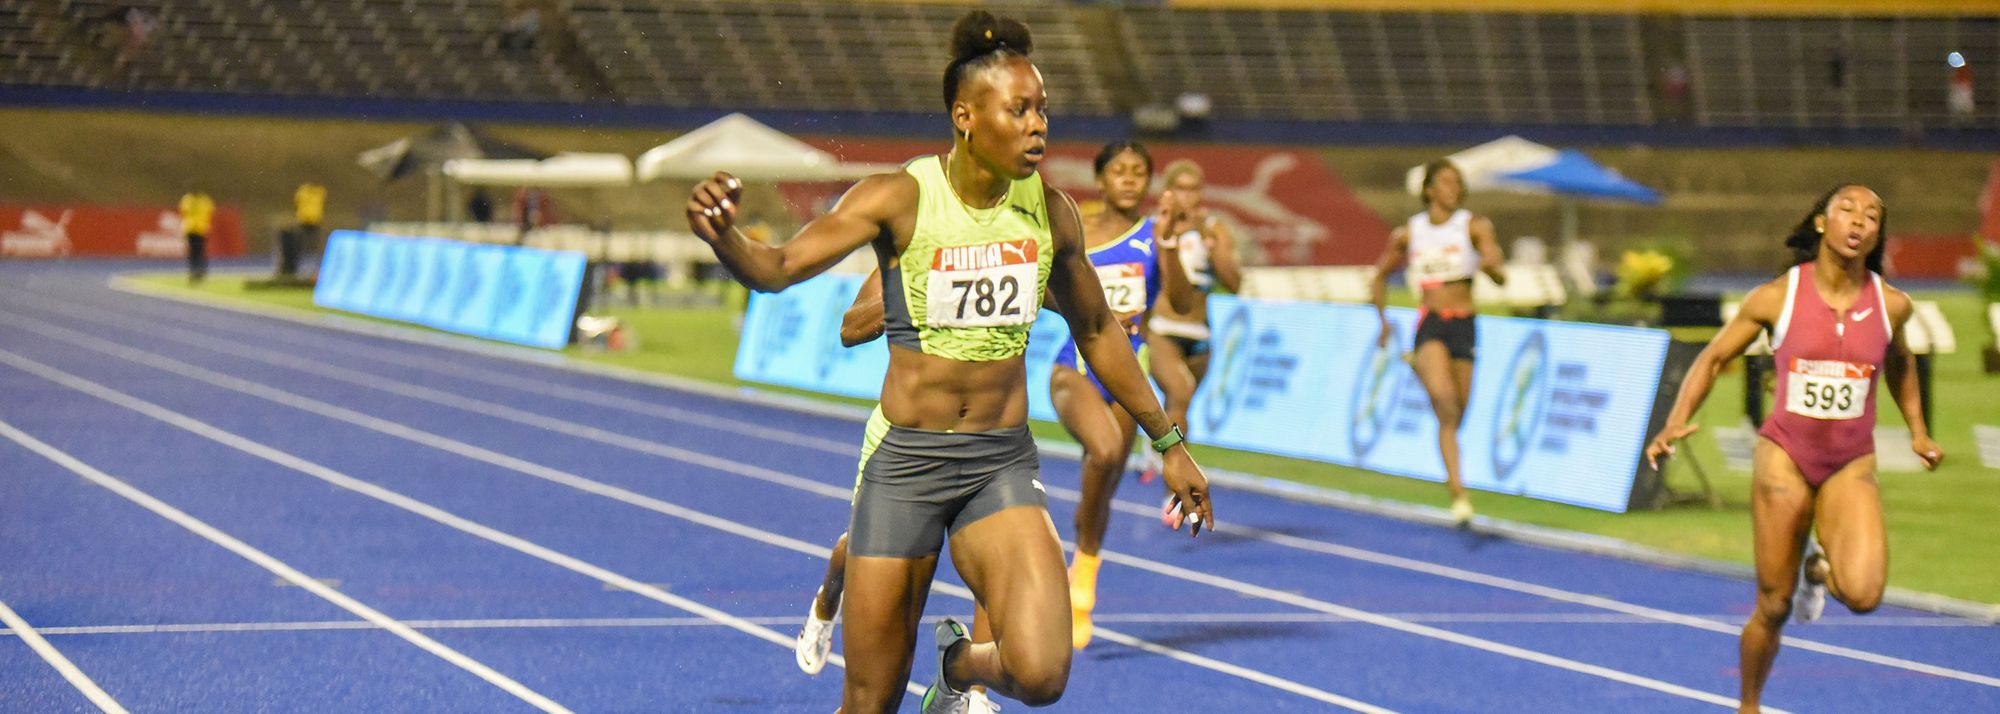 Jackson records the third-fastest 200m in history at the Jamaican Championships